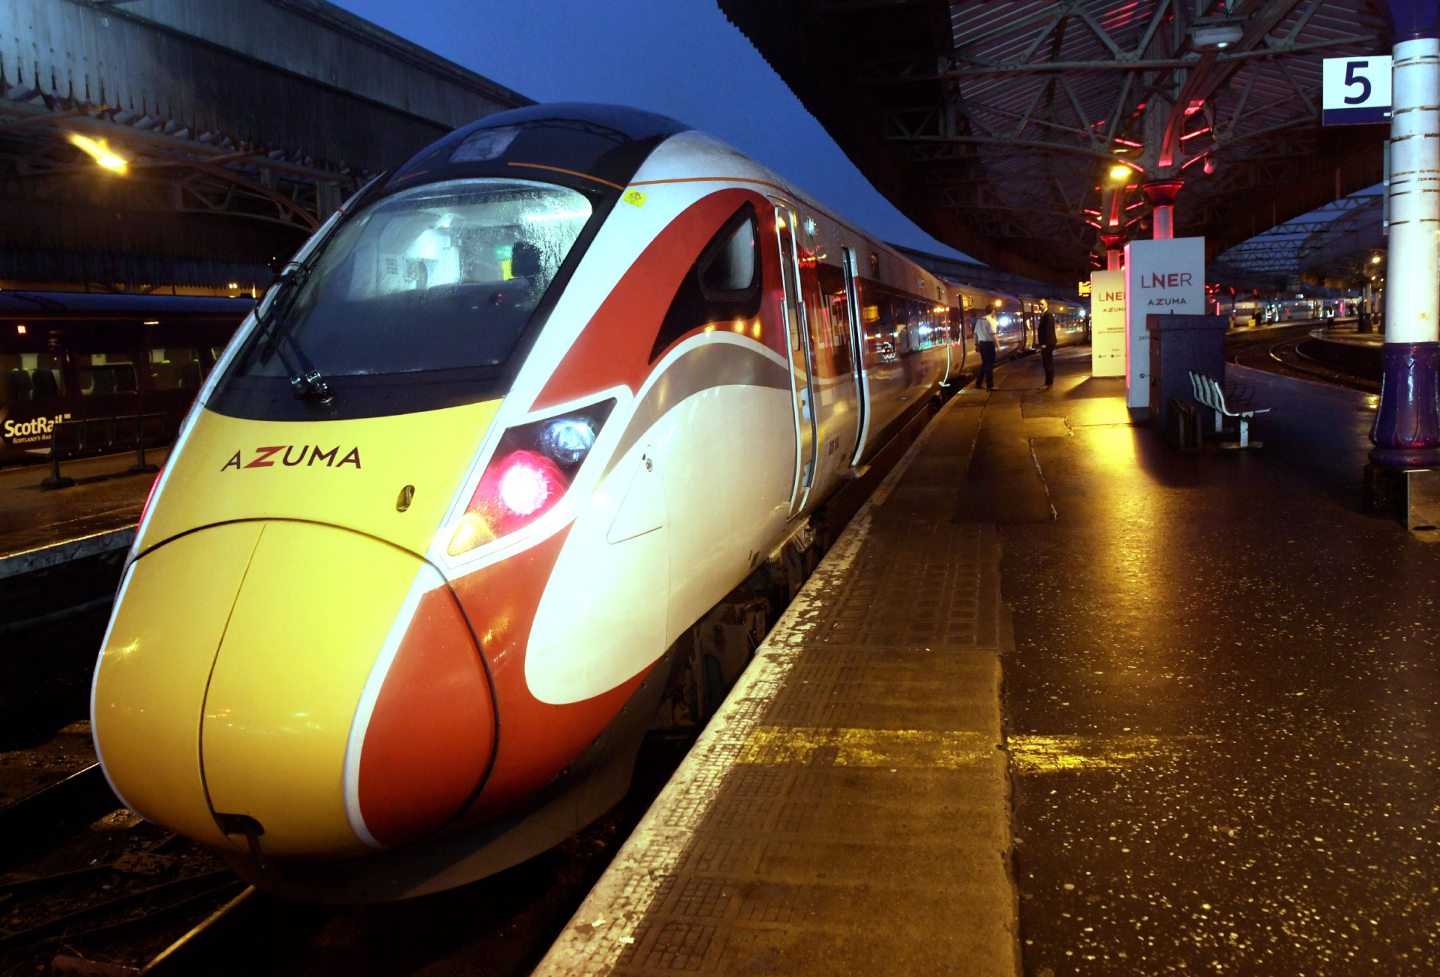 Aberdeen Train Station. AZUMA makes its debut leaving from Aberdeen to Kings Cross.   CR0016773
26/11/19
Picture by KATH FLANNERY